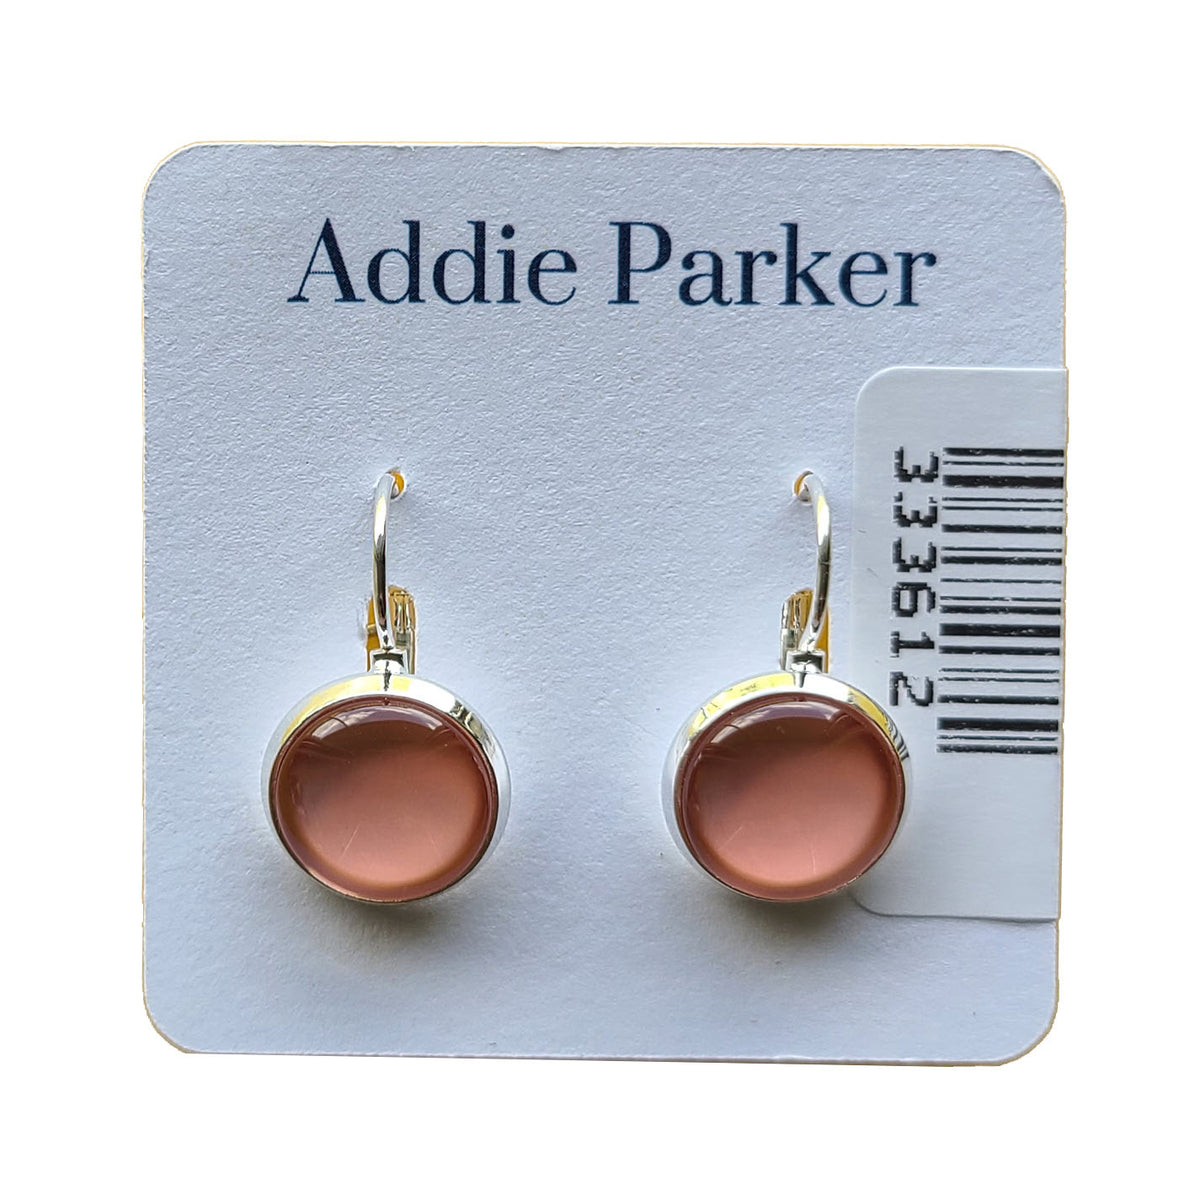 Silver-plated stud earrings with pink circular insets on a branded Addie Parker card. 
Product Name: ADDIE PARKER EARRINGS CORAL SOLID
Brand Name: Addie Parker